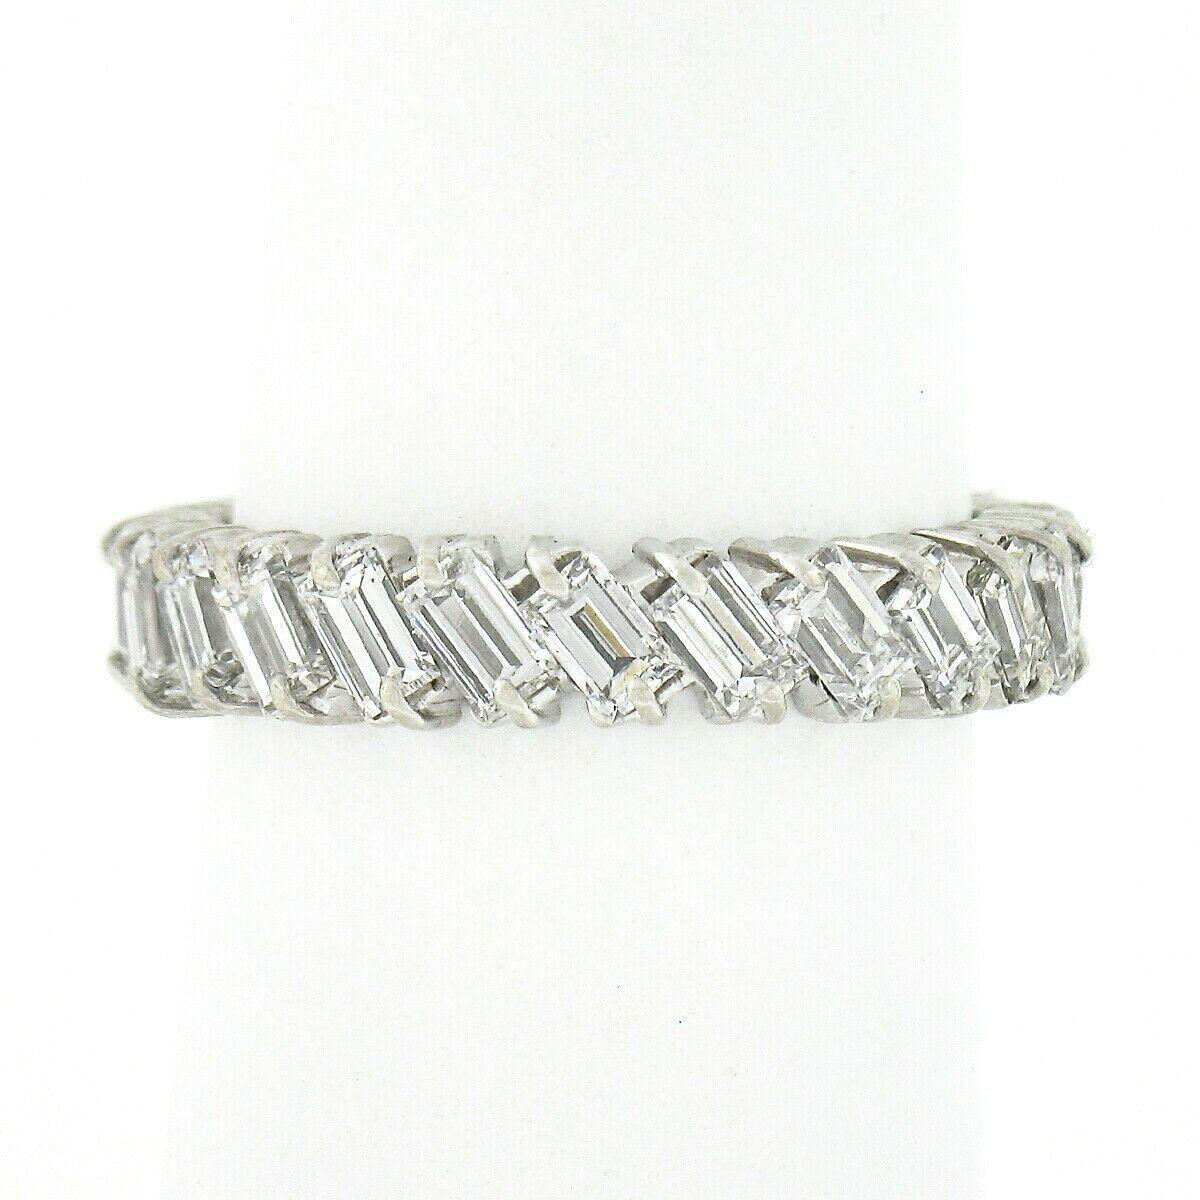 This absolutely gorgeous vintage eternity band ring is crafted in solid platinum and features 24 SUPER FINE quality straight baguette cut diamonds uniquely set at a slant entirely throughout the band. These stunning diamonds total approximately 2.88